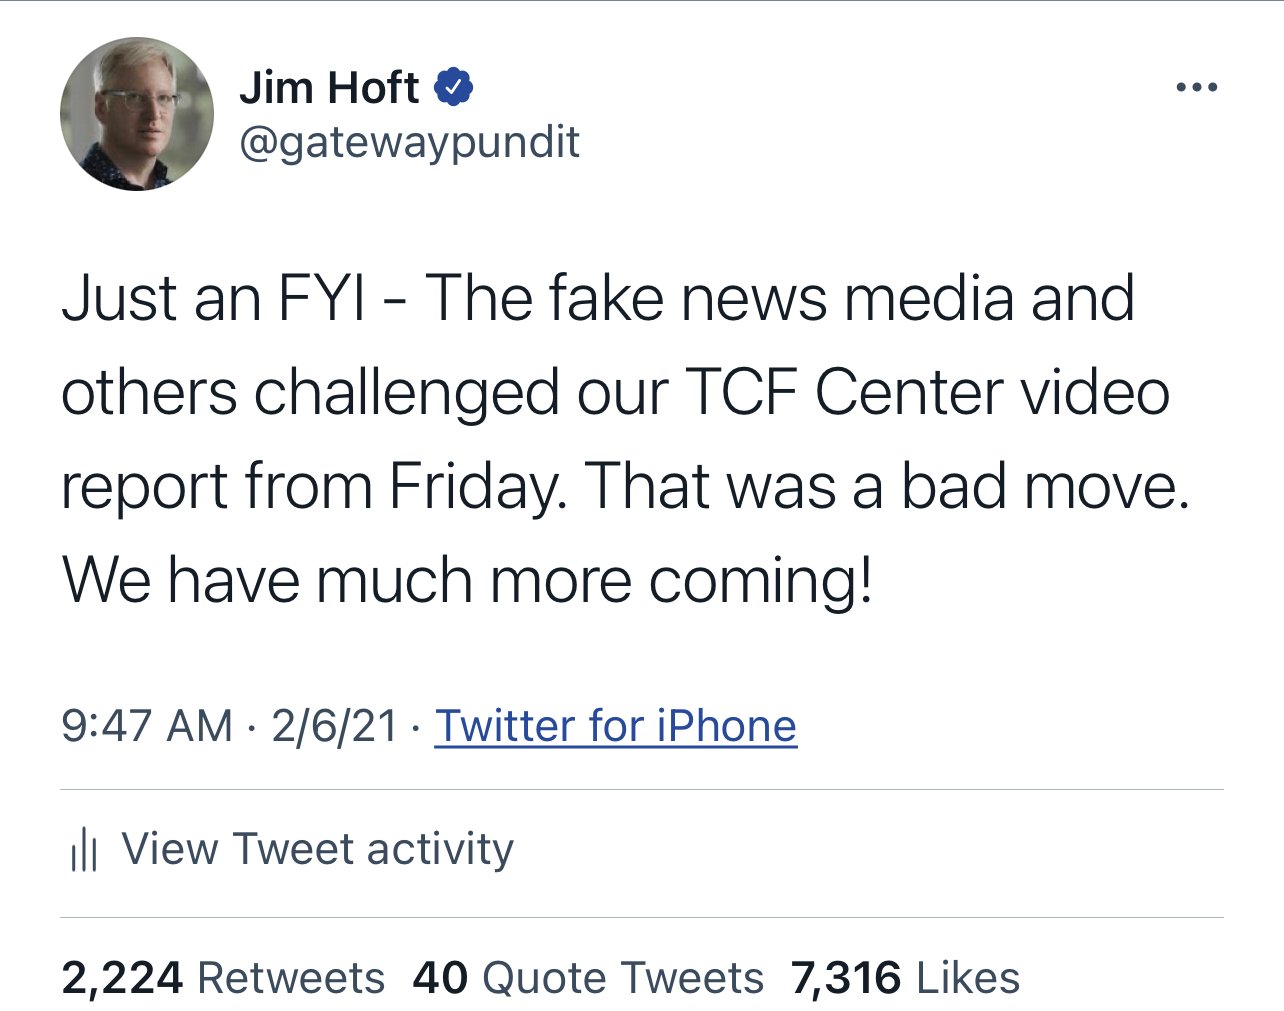  Gateway Pundit Suspended Indefinitely from Twitter After Announcing More Video of TCF Center Fraud Will Be Released in Coming Days